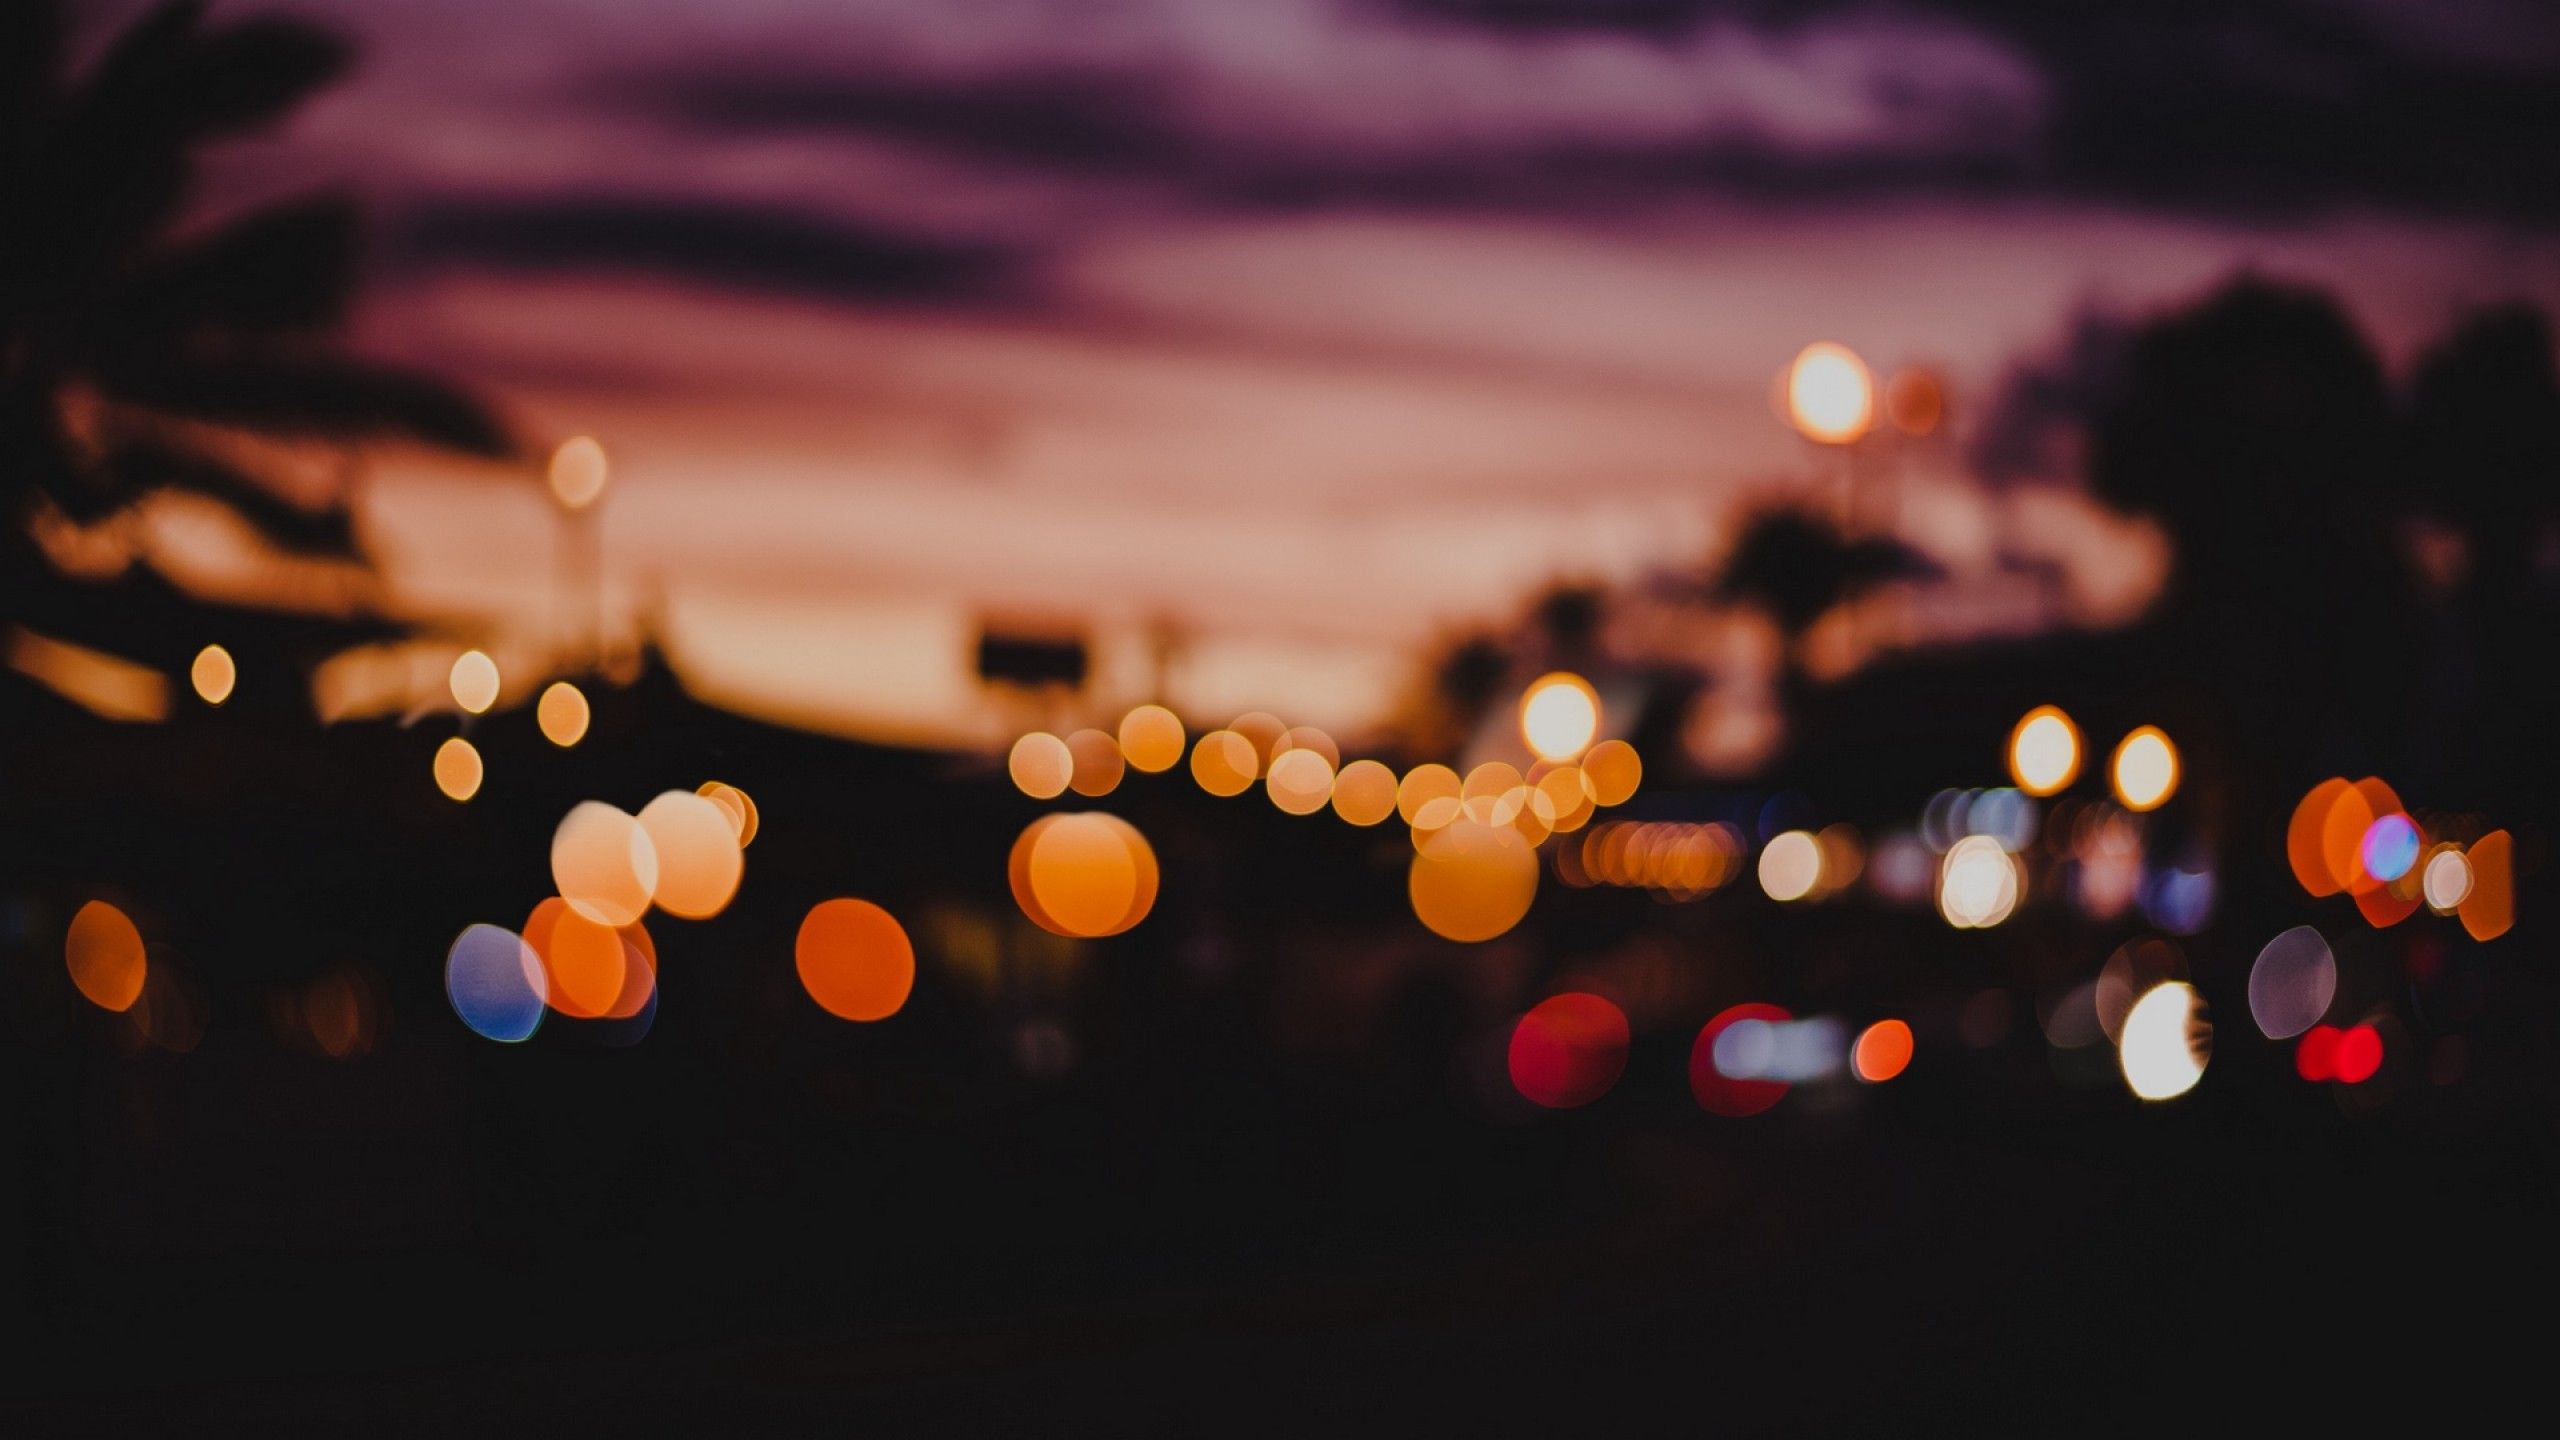 Blurry city lights HD Wallpaper Youtube Cover Photo